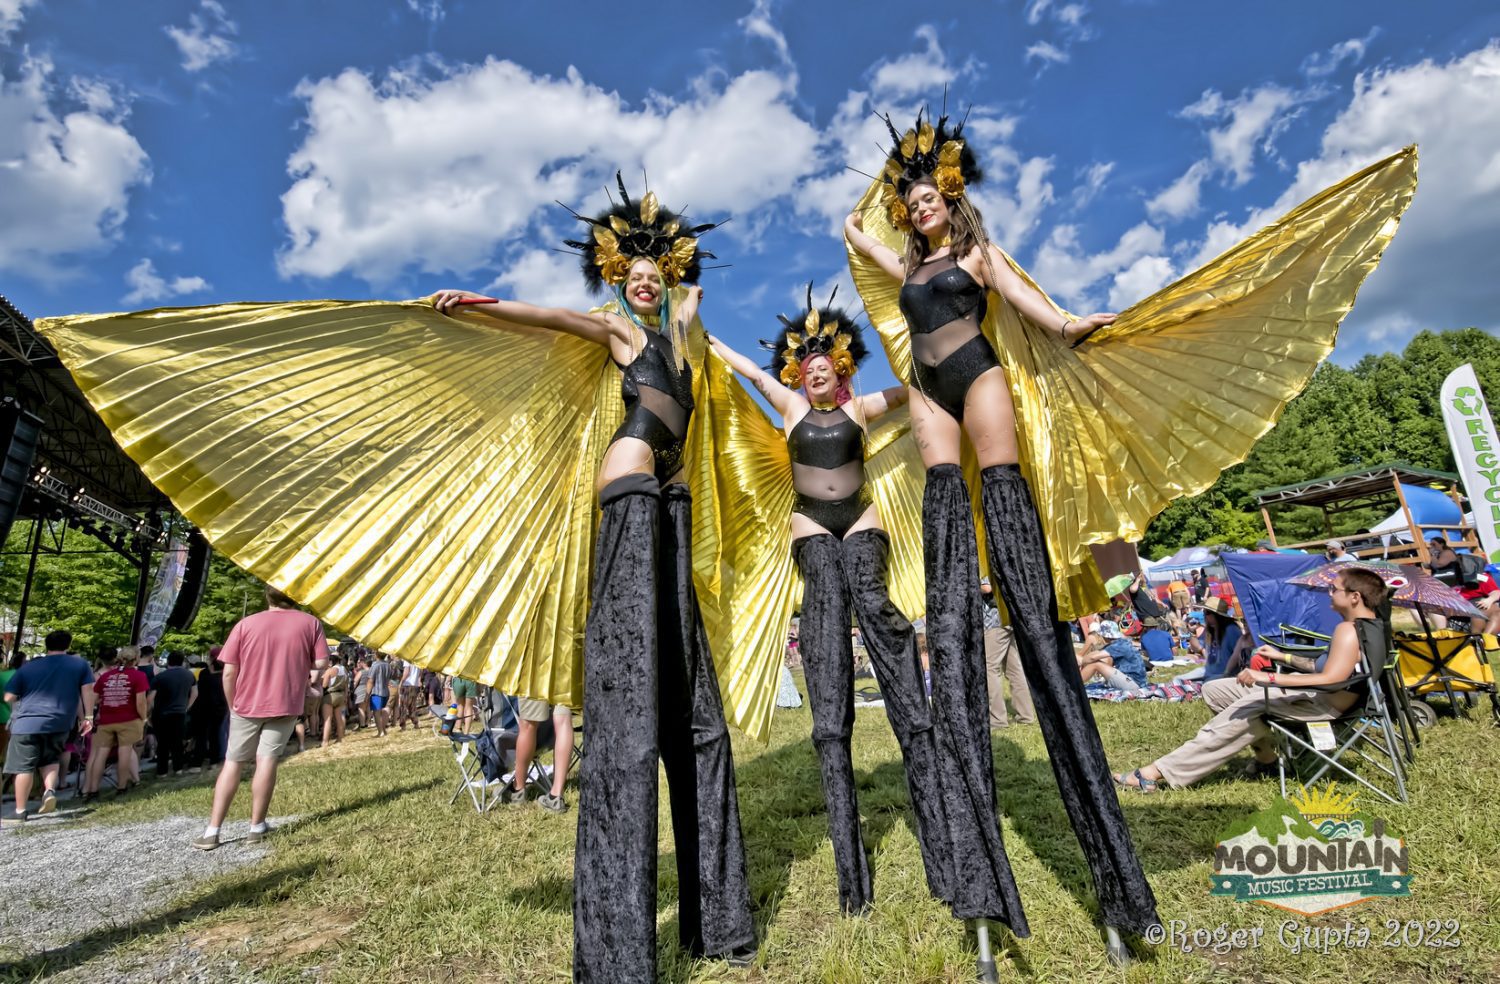 People in costumes at Mountain Music Festival